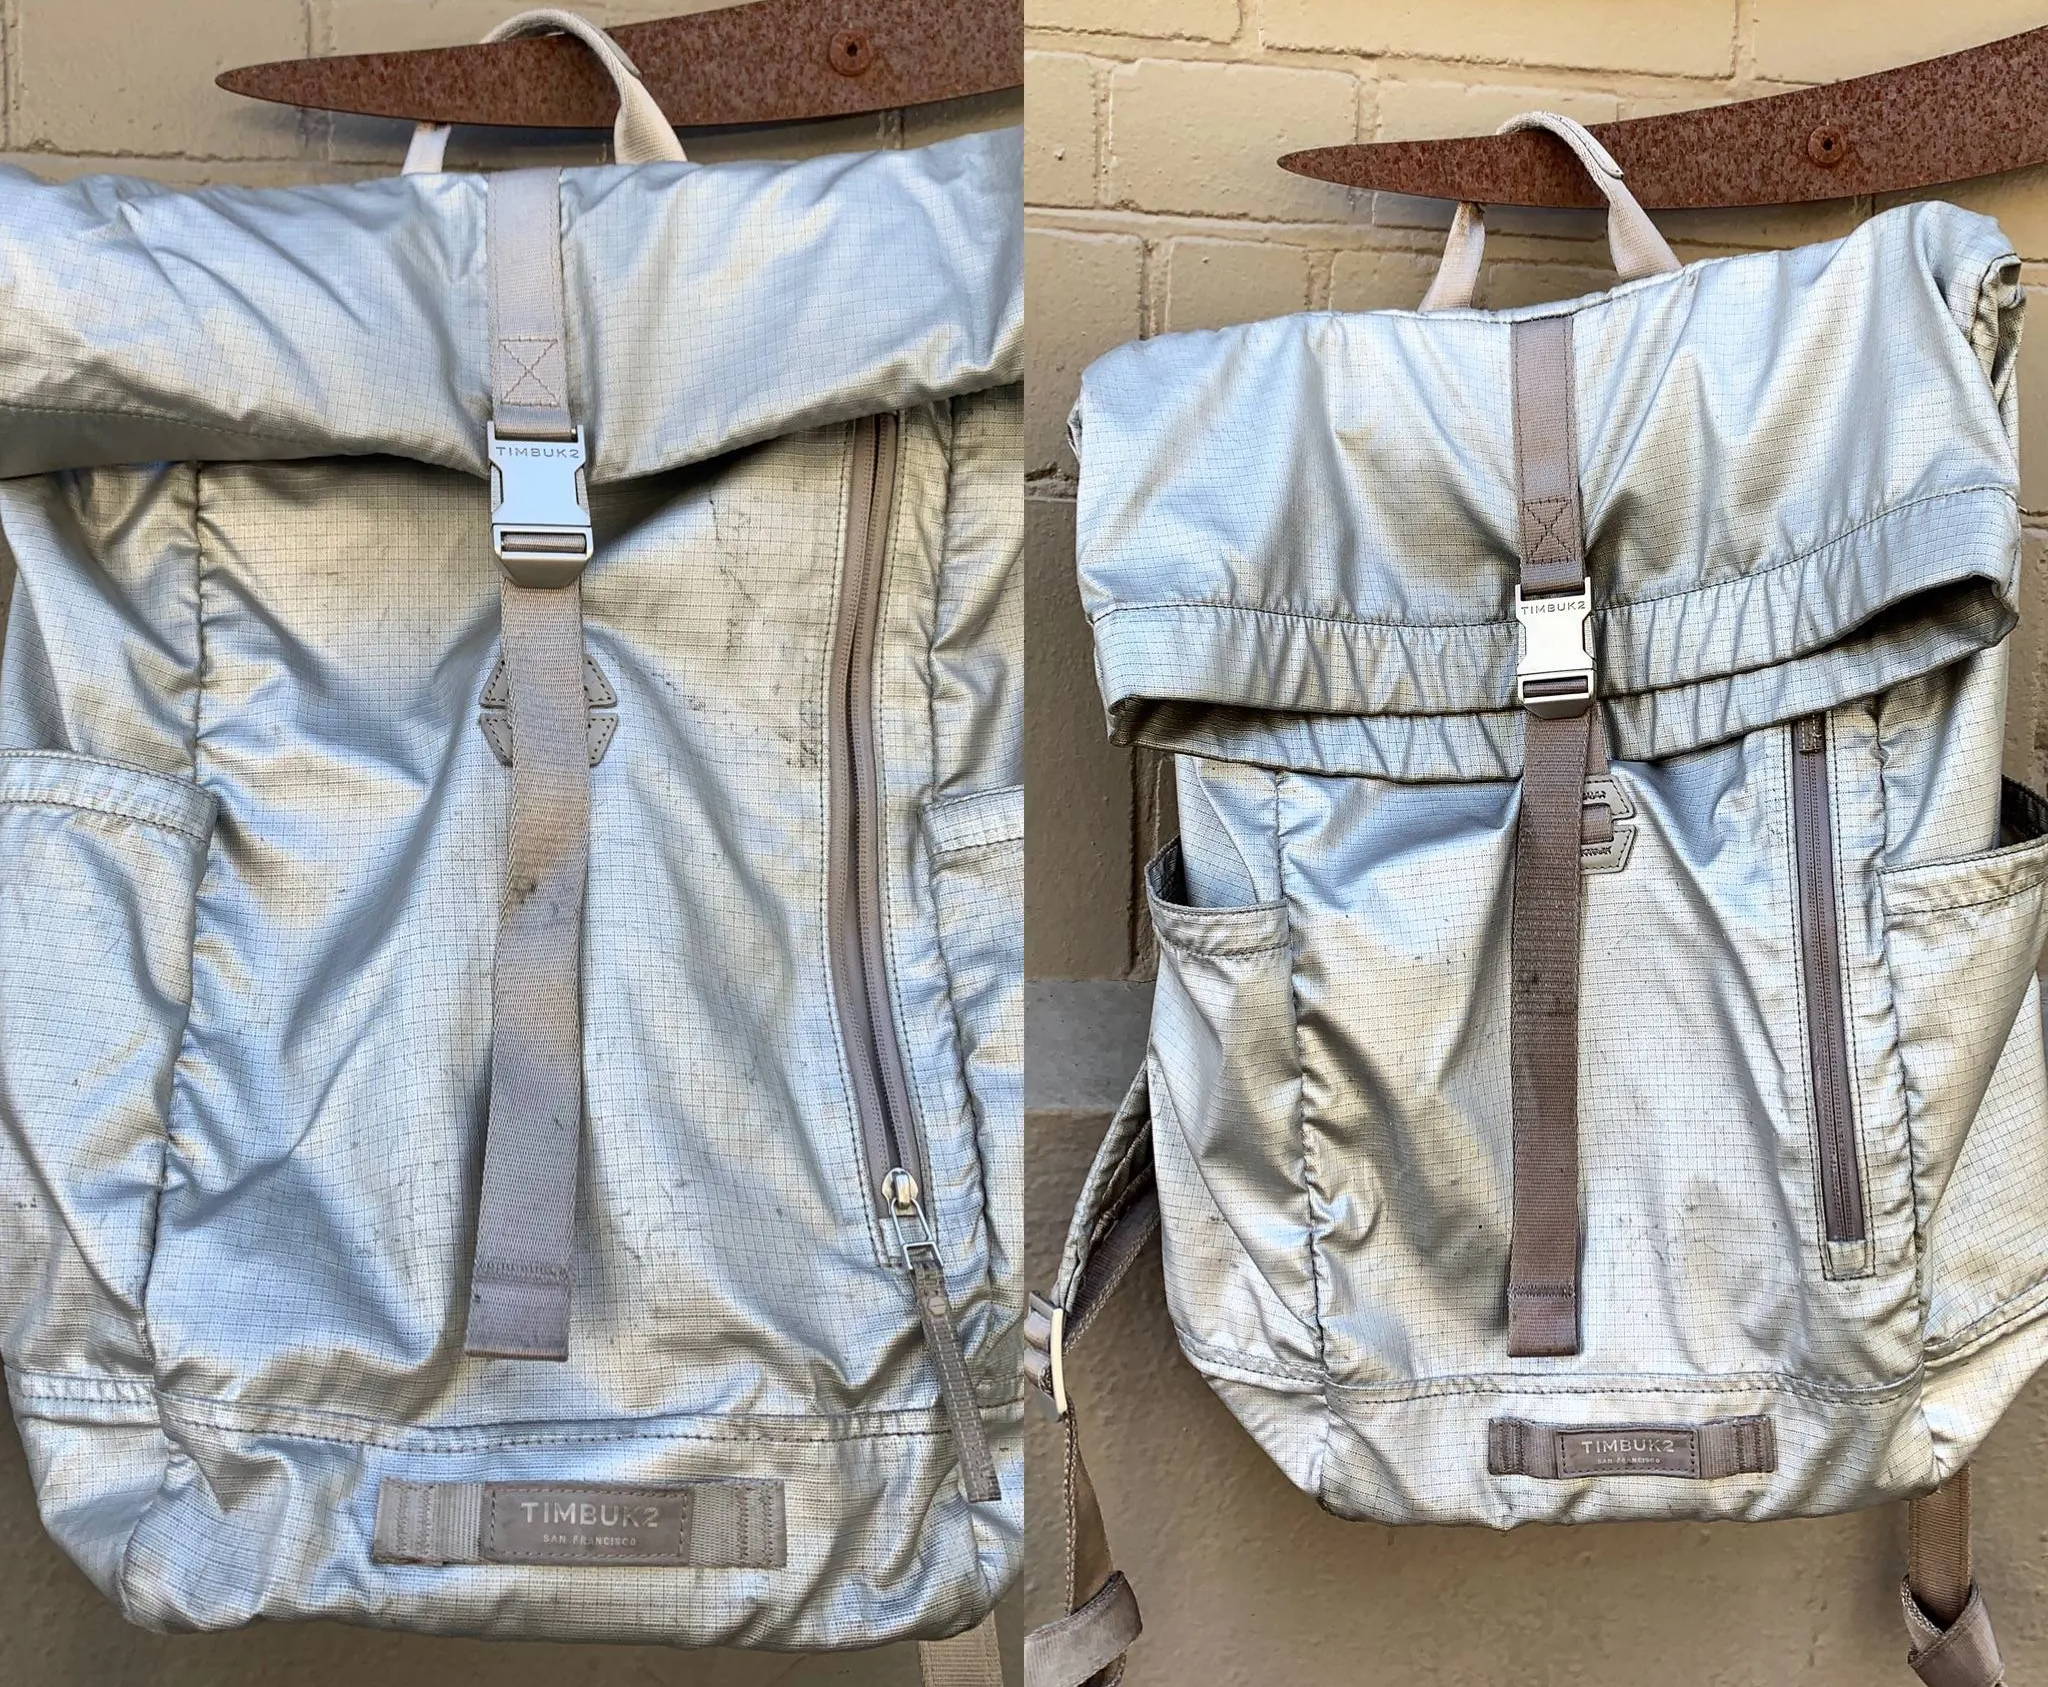 How to Clean your Timbuk2 Bag